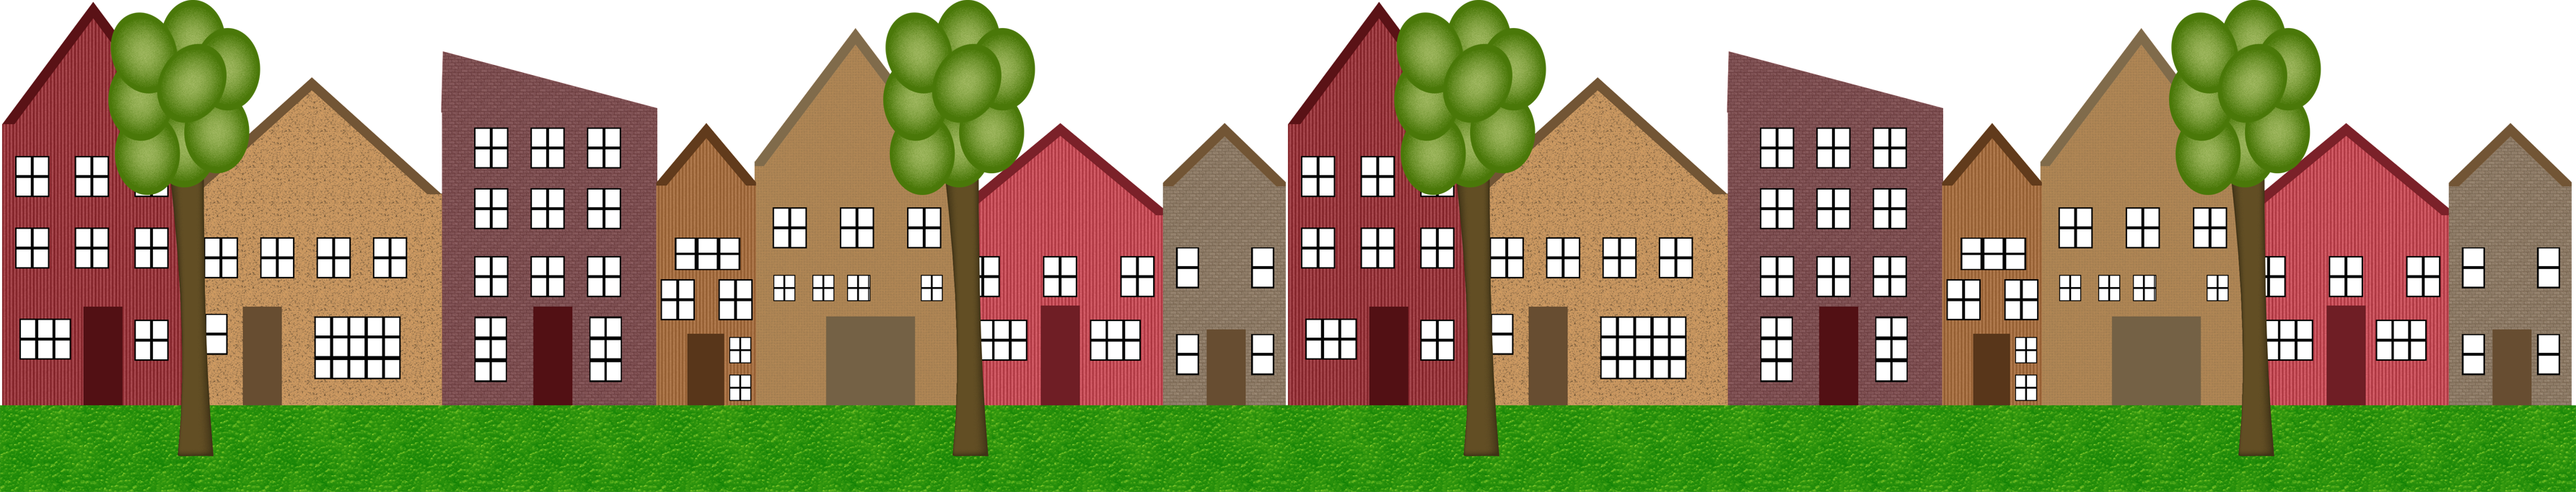 Clip Art Of Homes In A Row Clipart.